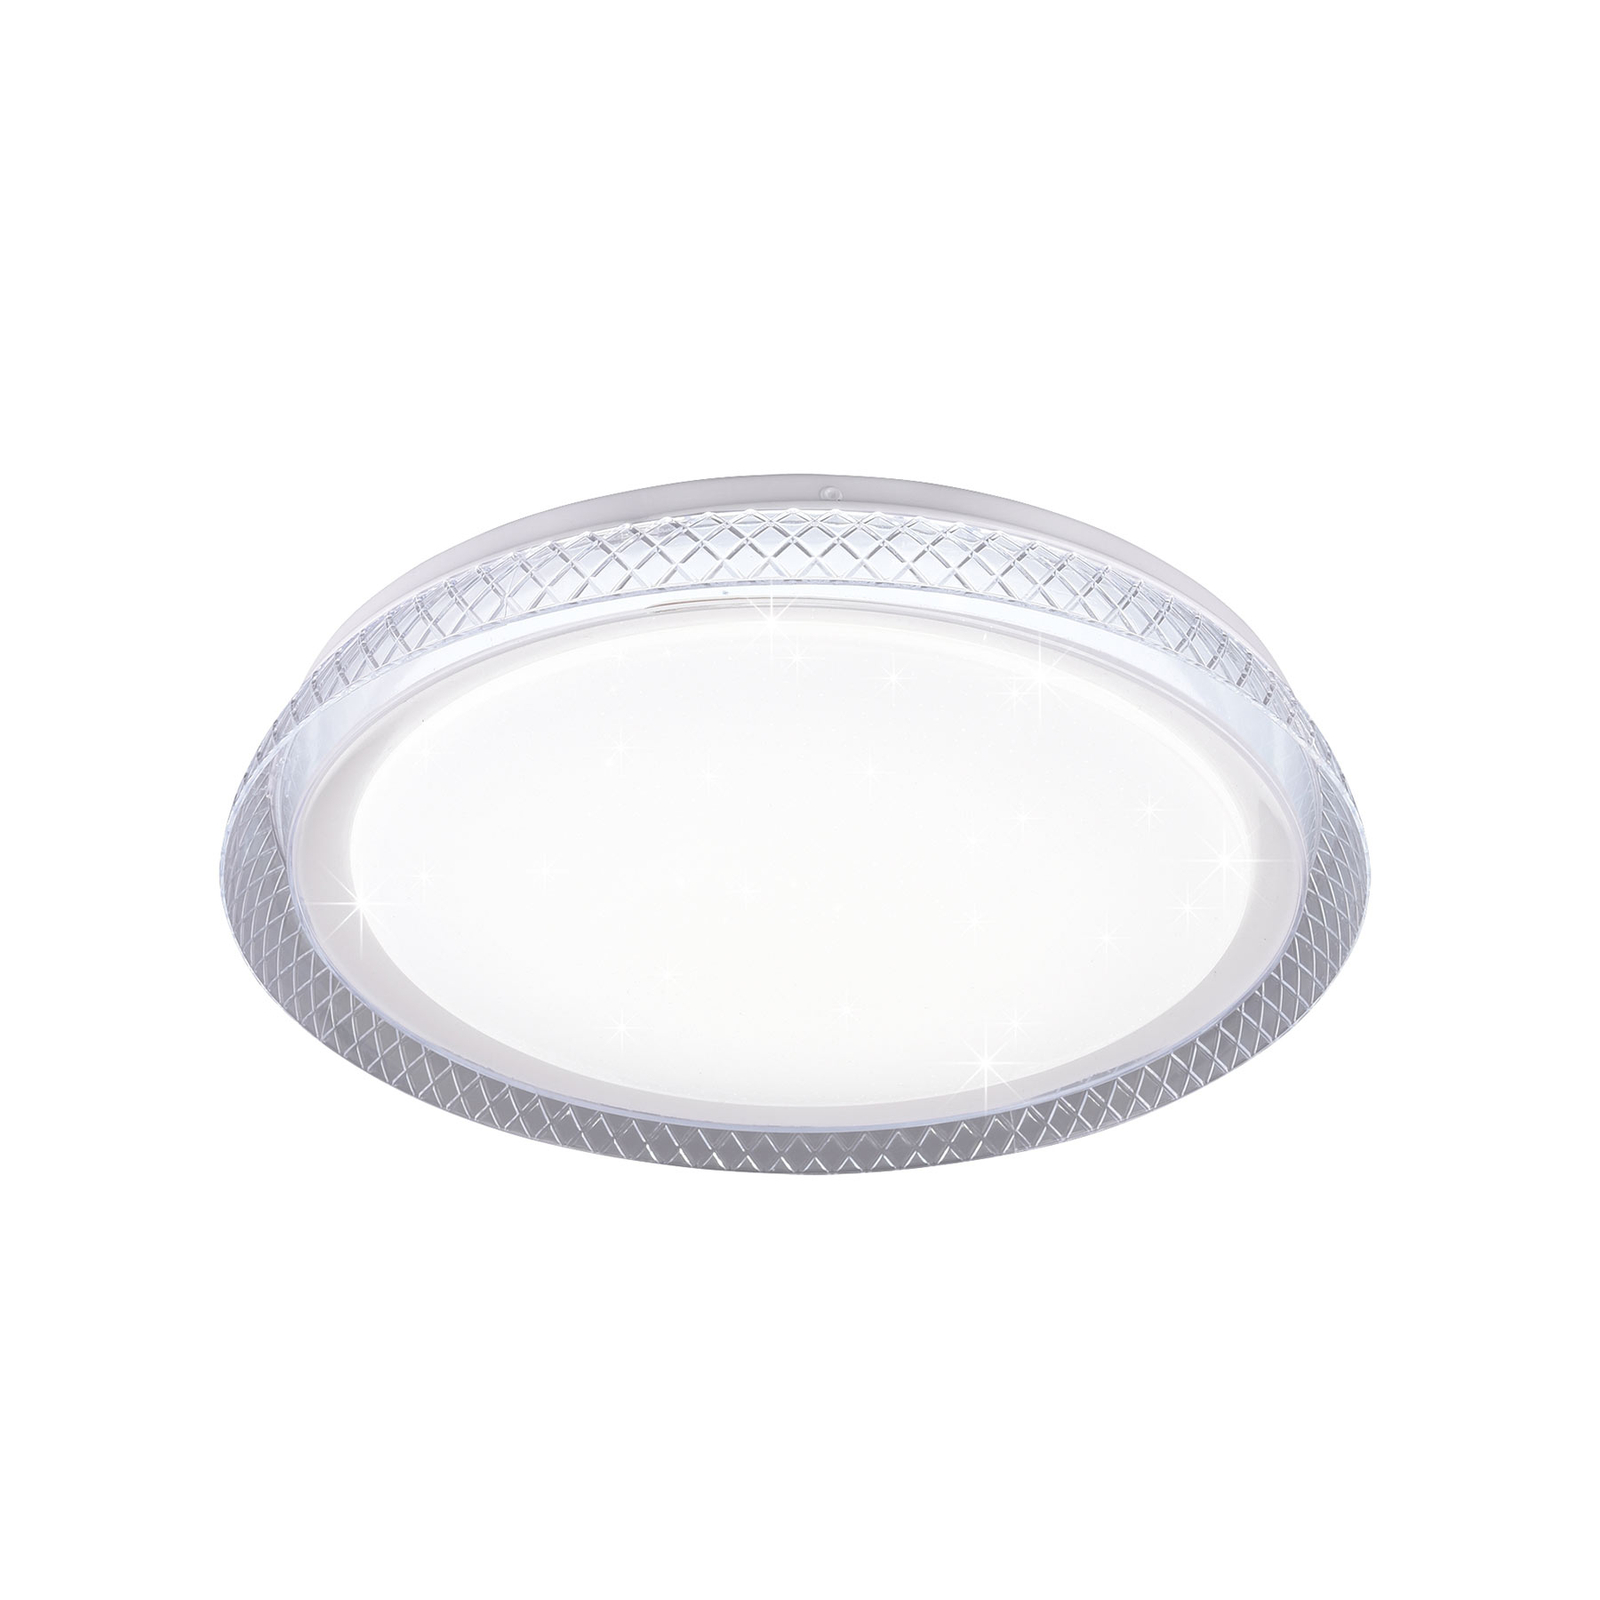 LED-taklampa Heracles, tunable white, Ø 38 cm